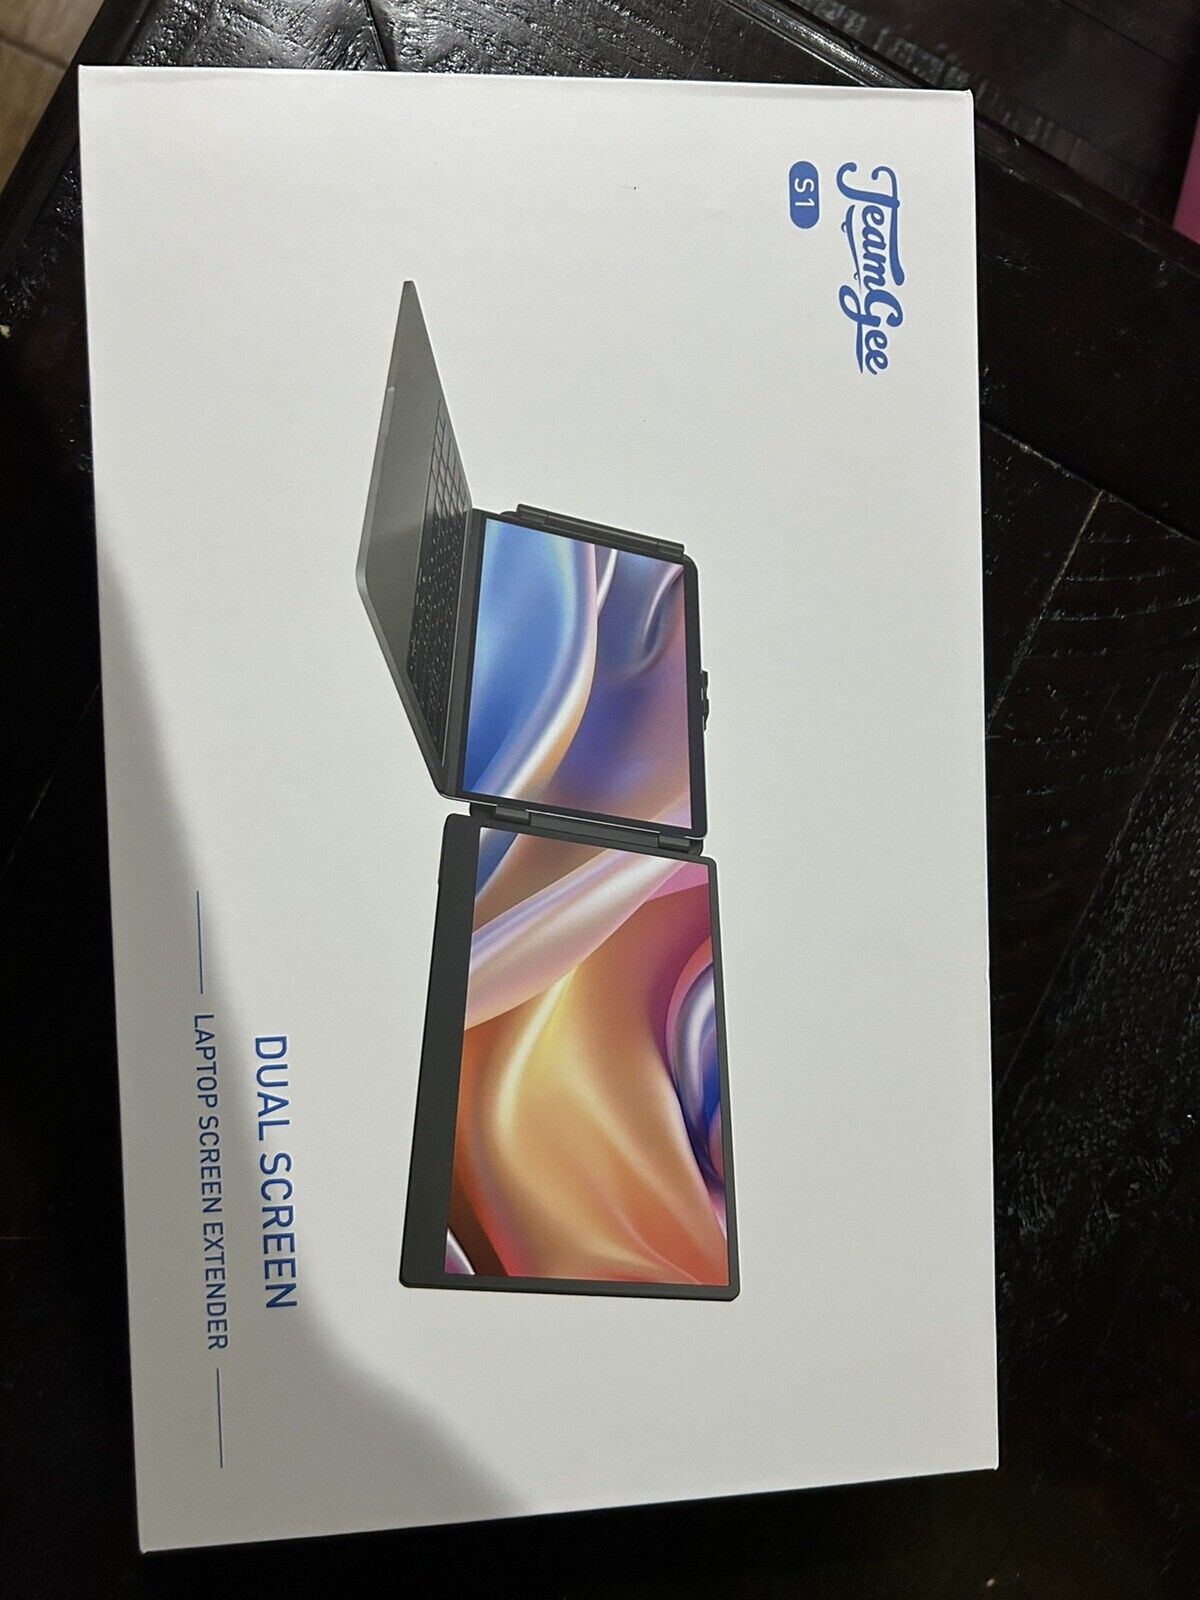 Teamgee S1 14” Dual Screen Portable Monitor (New)